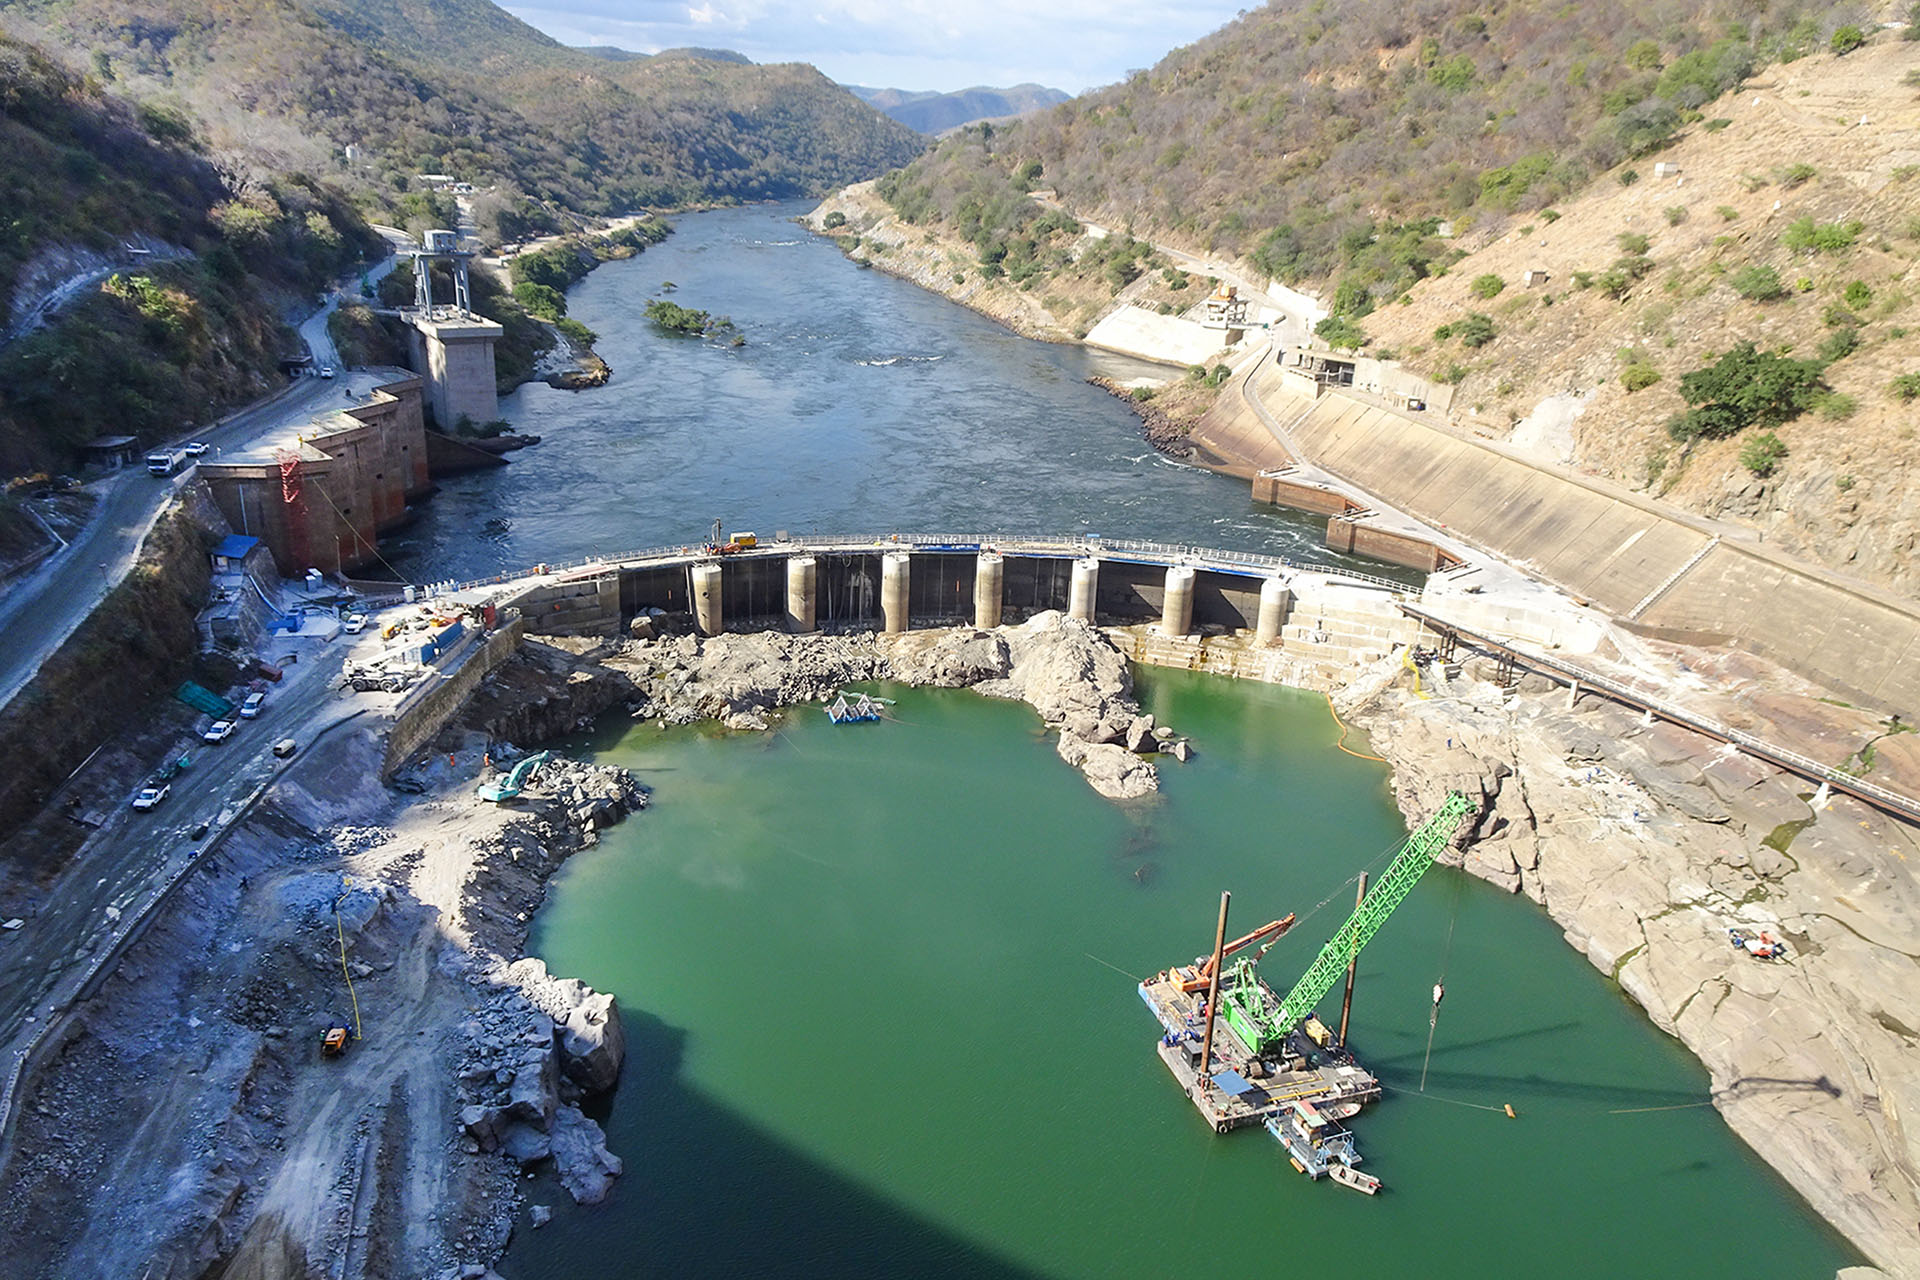 Kariba Dam has supplied the water requirements for Zimbabwe and Zambia for over 60 years. 